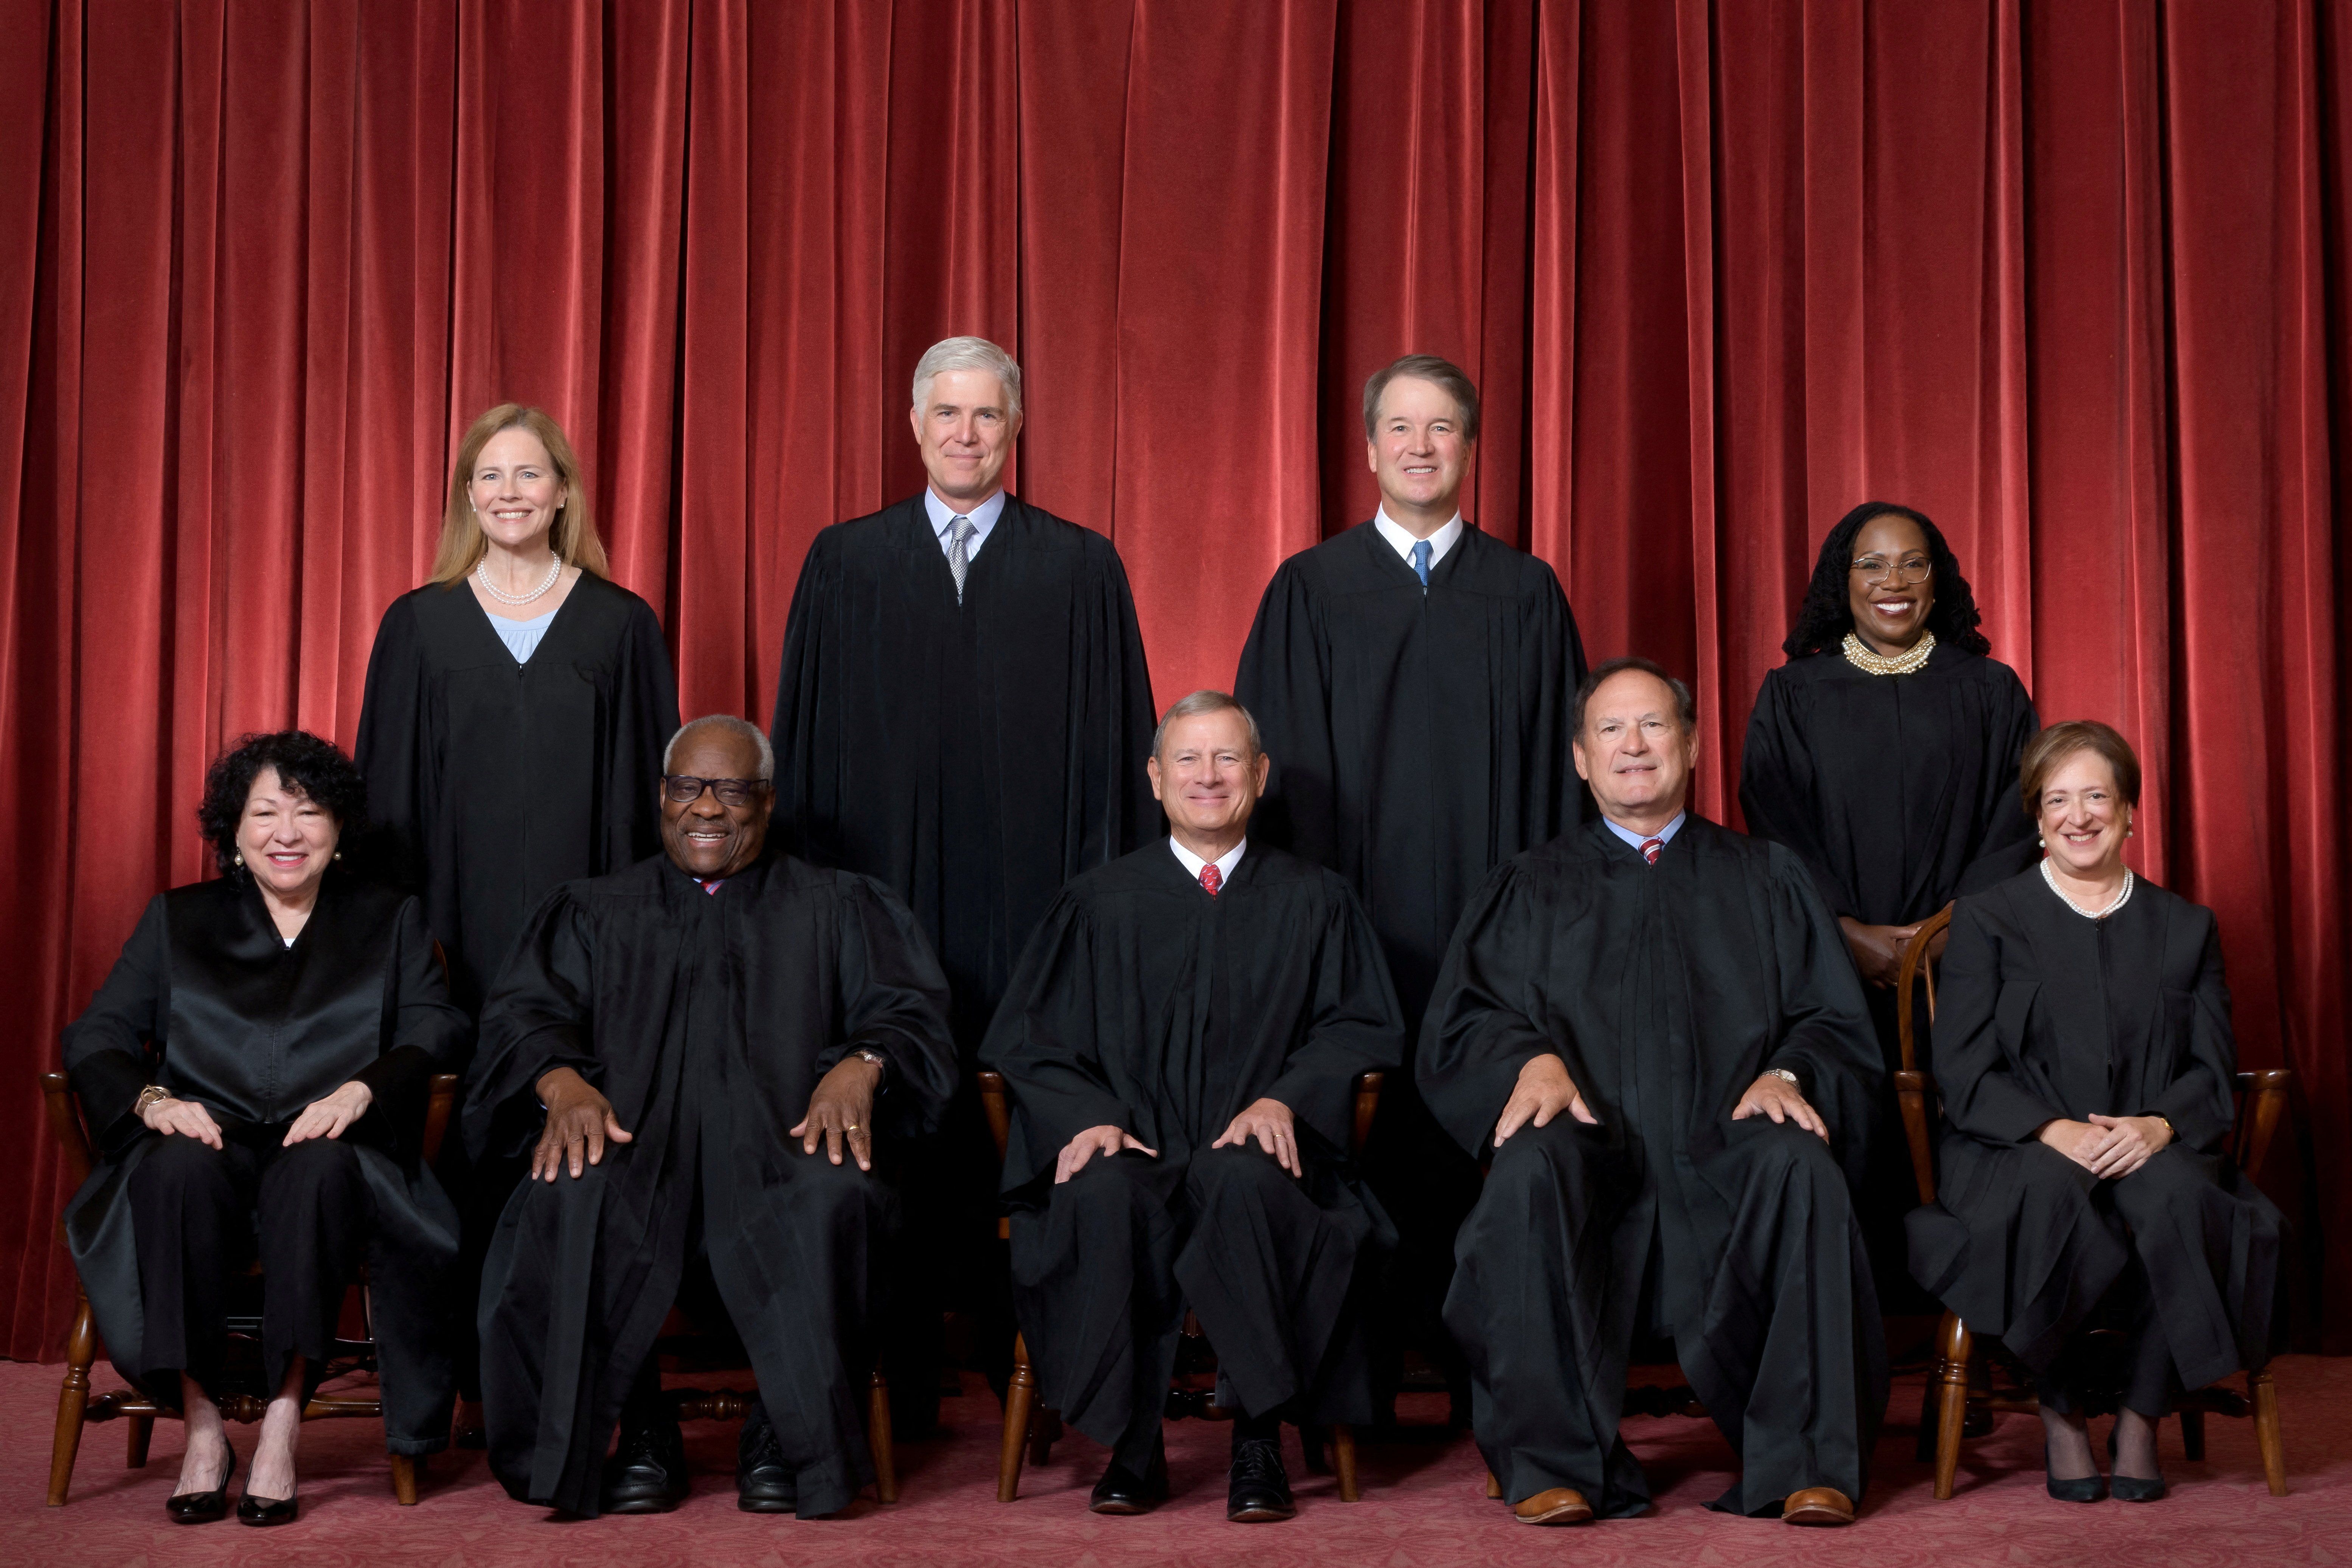 The official formal group photograph of the current U.S. Supreme Court.